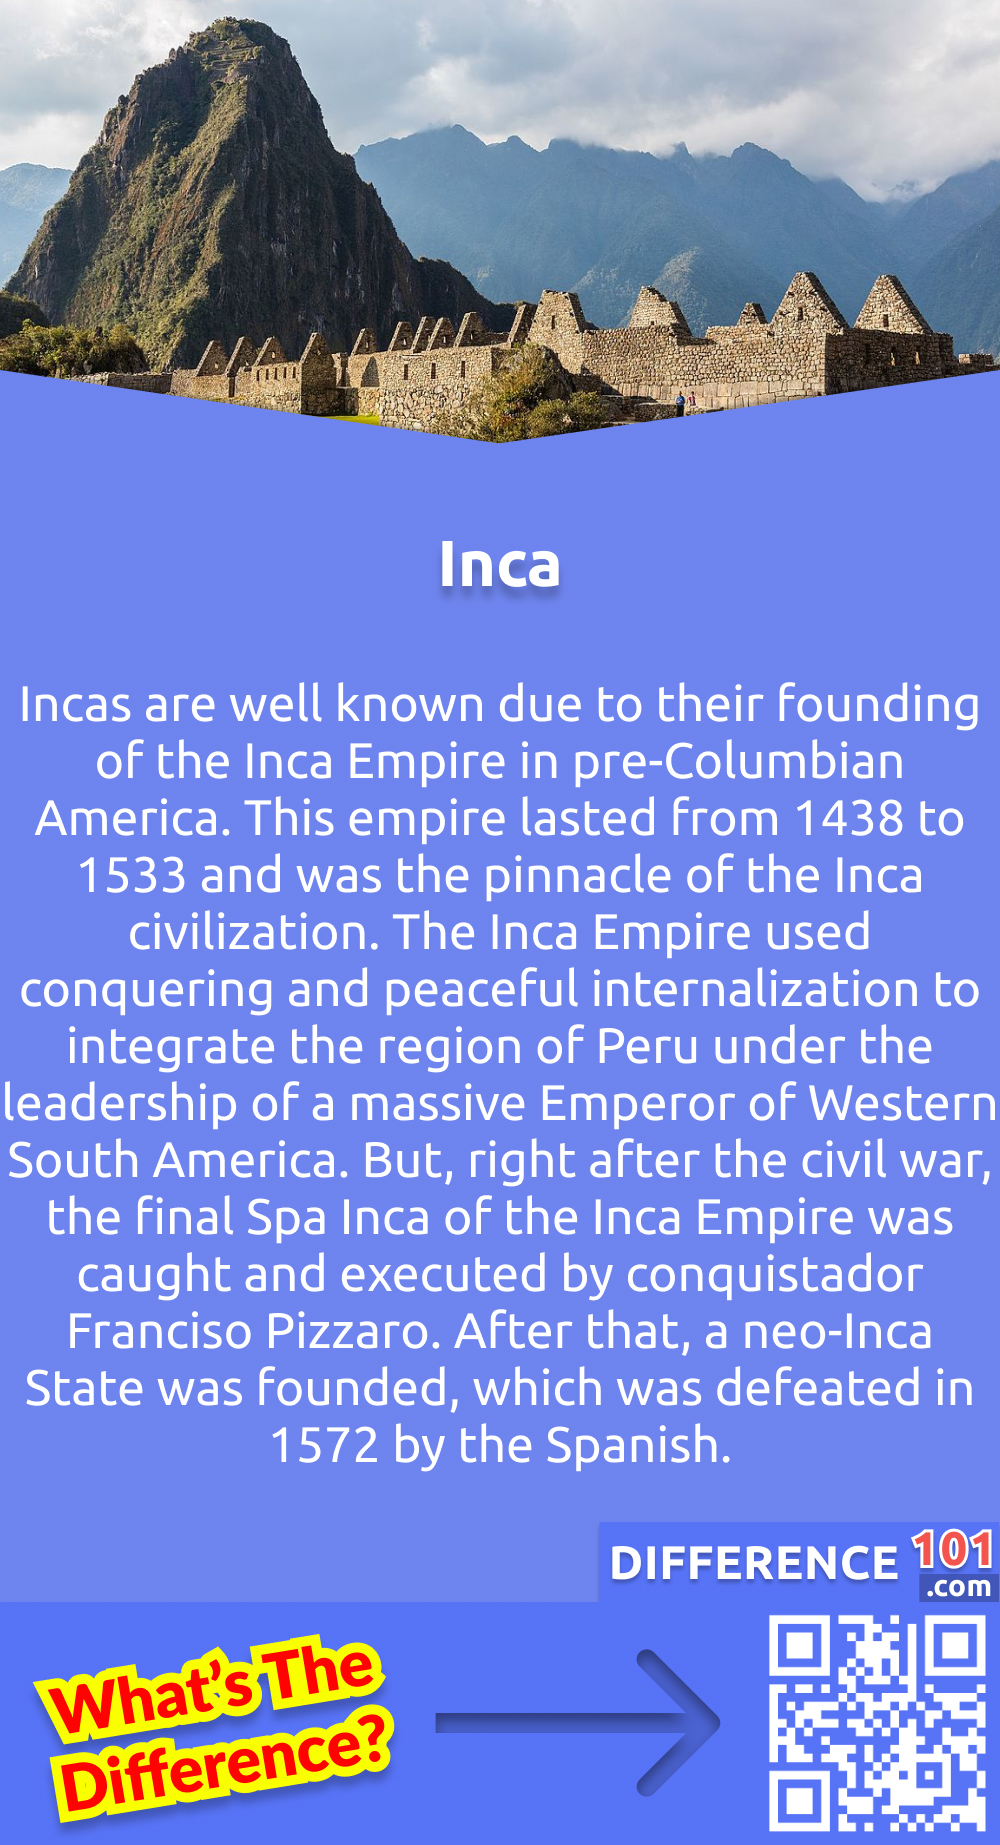 What Are Incas? Incas are well known due to their founding of the Inca Empire in pre-Columbian America. This empire lasted from 1438 to 1533 and was the pinnacle of the Inca civilization. The Inca Empire used conquering and peaceful internalization to integrate the region of Peru under the leadership of a massive Emperor of Western South America. But, right after the civil war, the final Spa Inca of the Inca Empire was caught and executed by conquistador Franciso Pizzaro. After that, a neo-Inca State was founded, which was defeated in 1572 by the Spanish.